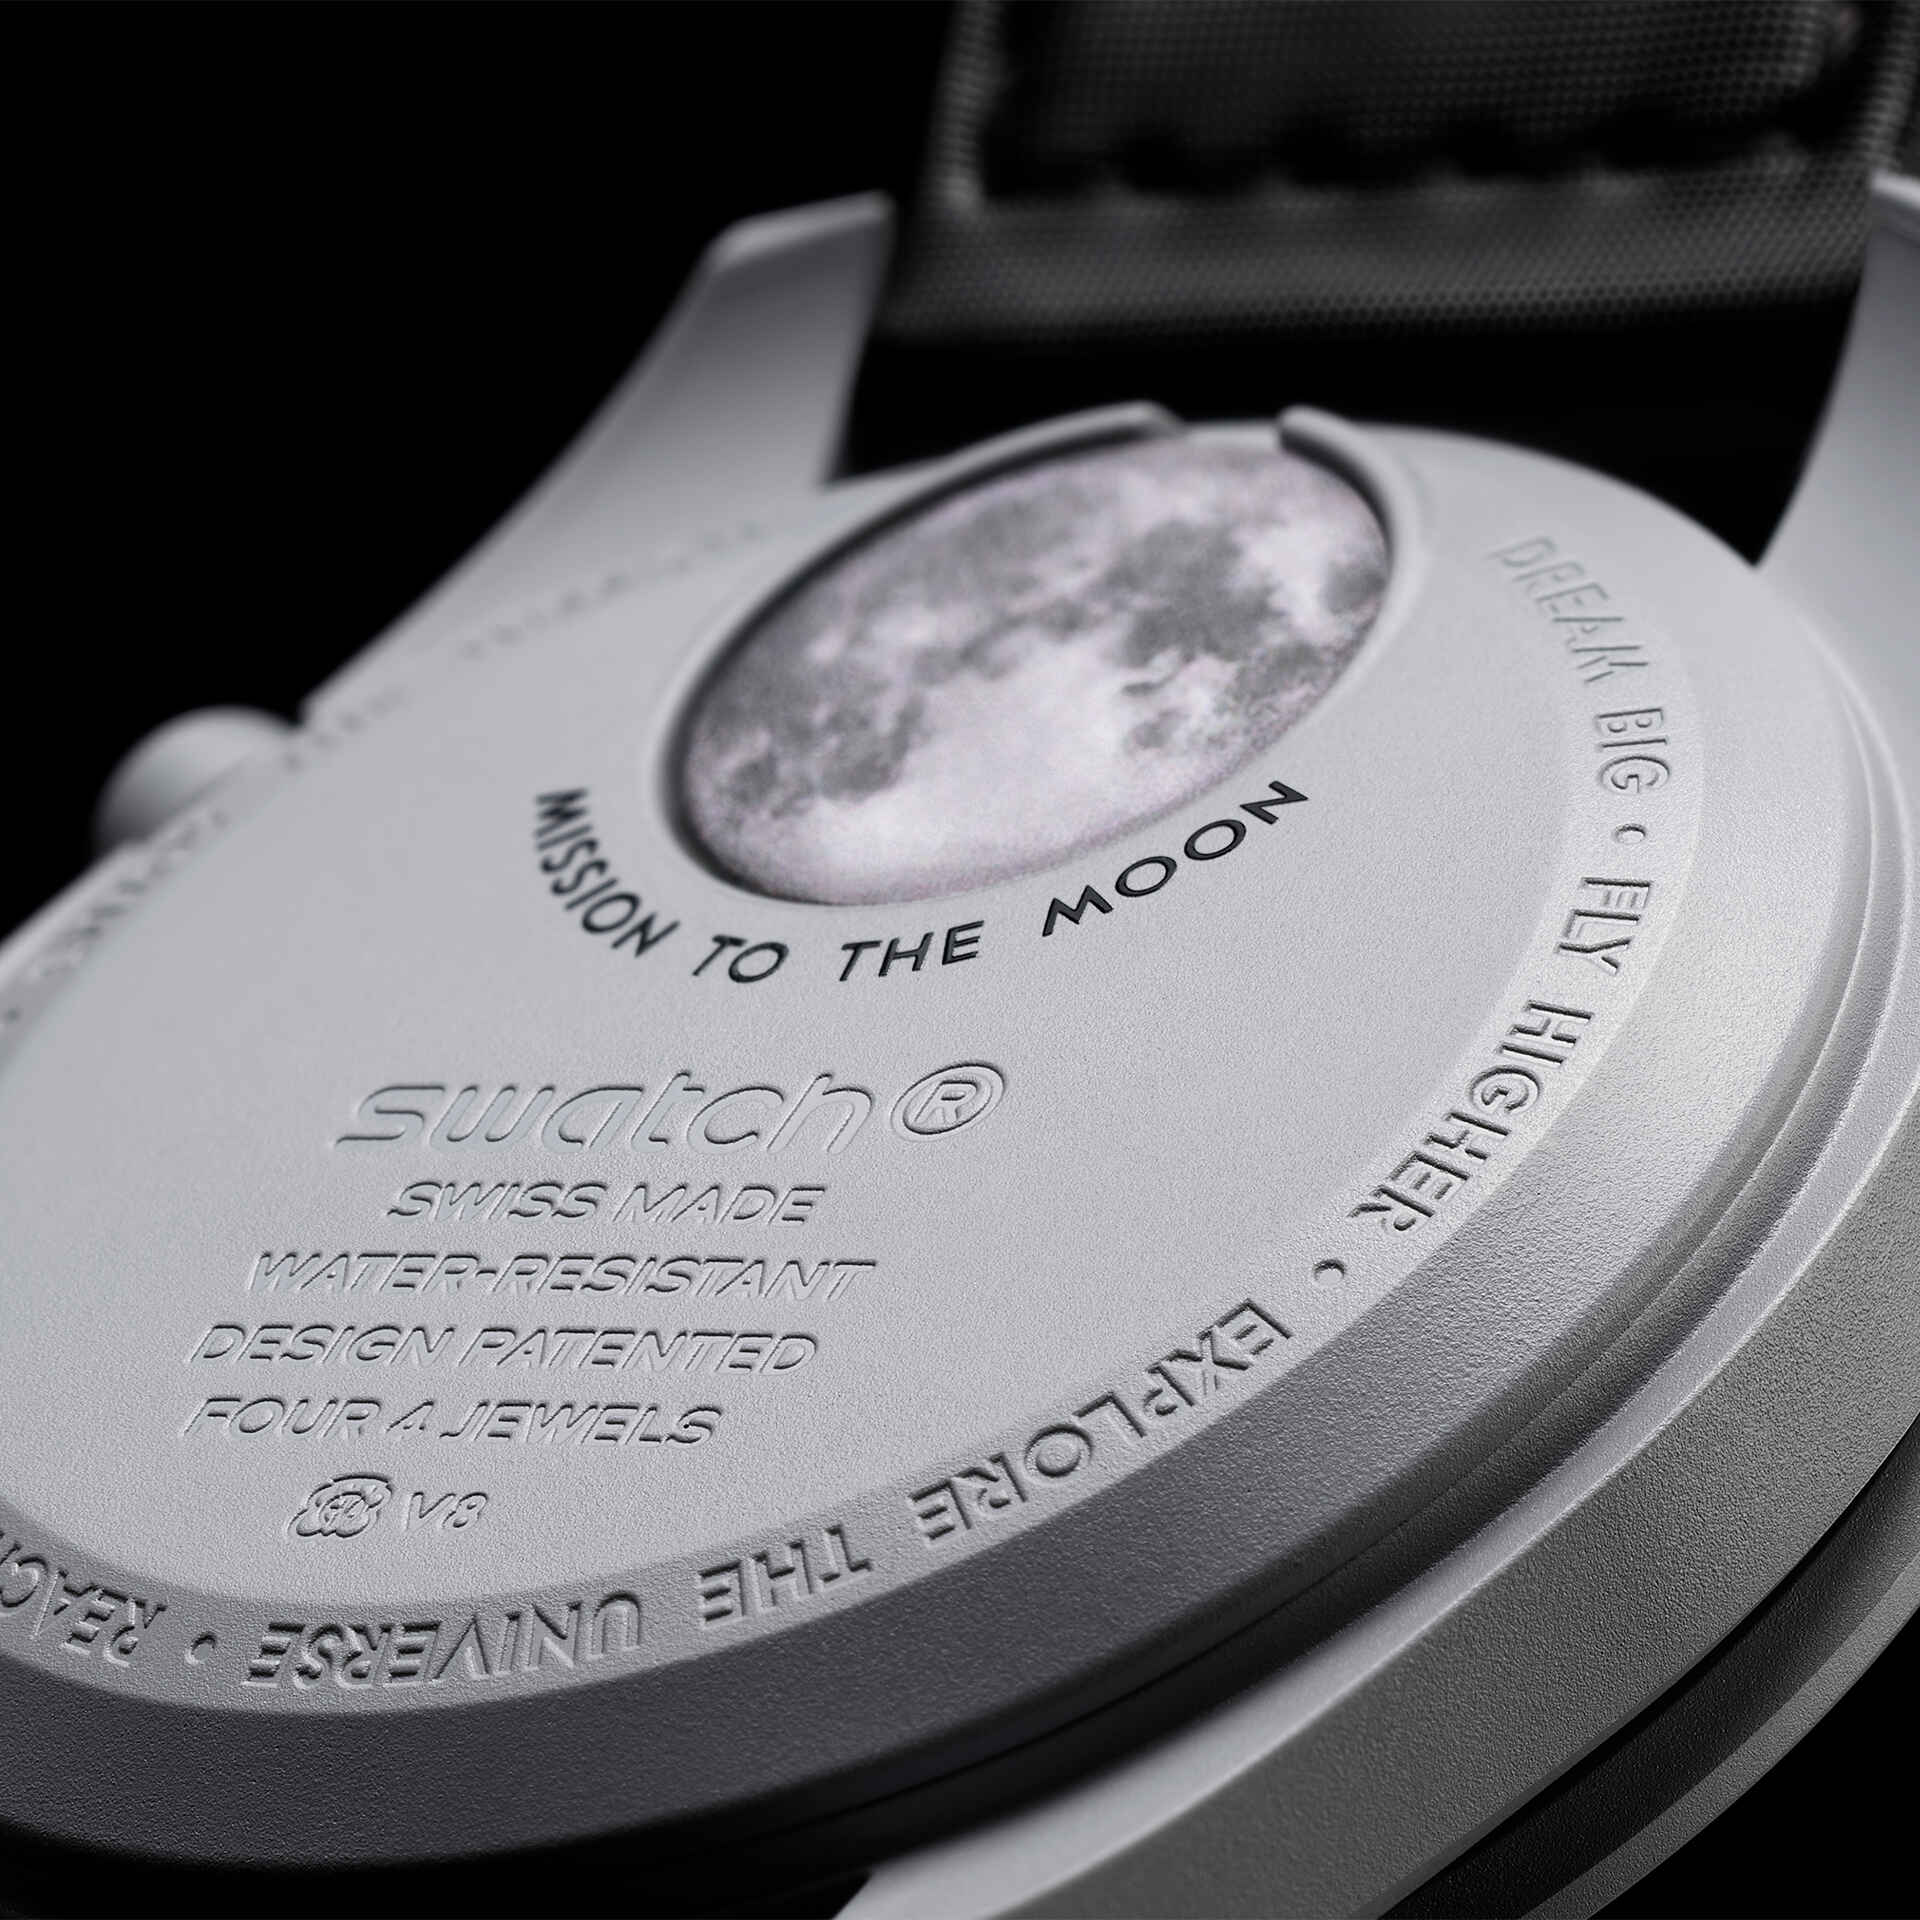 Omega x Swatch Speedmaster "Moonswatch"   Mission to the Moon